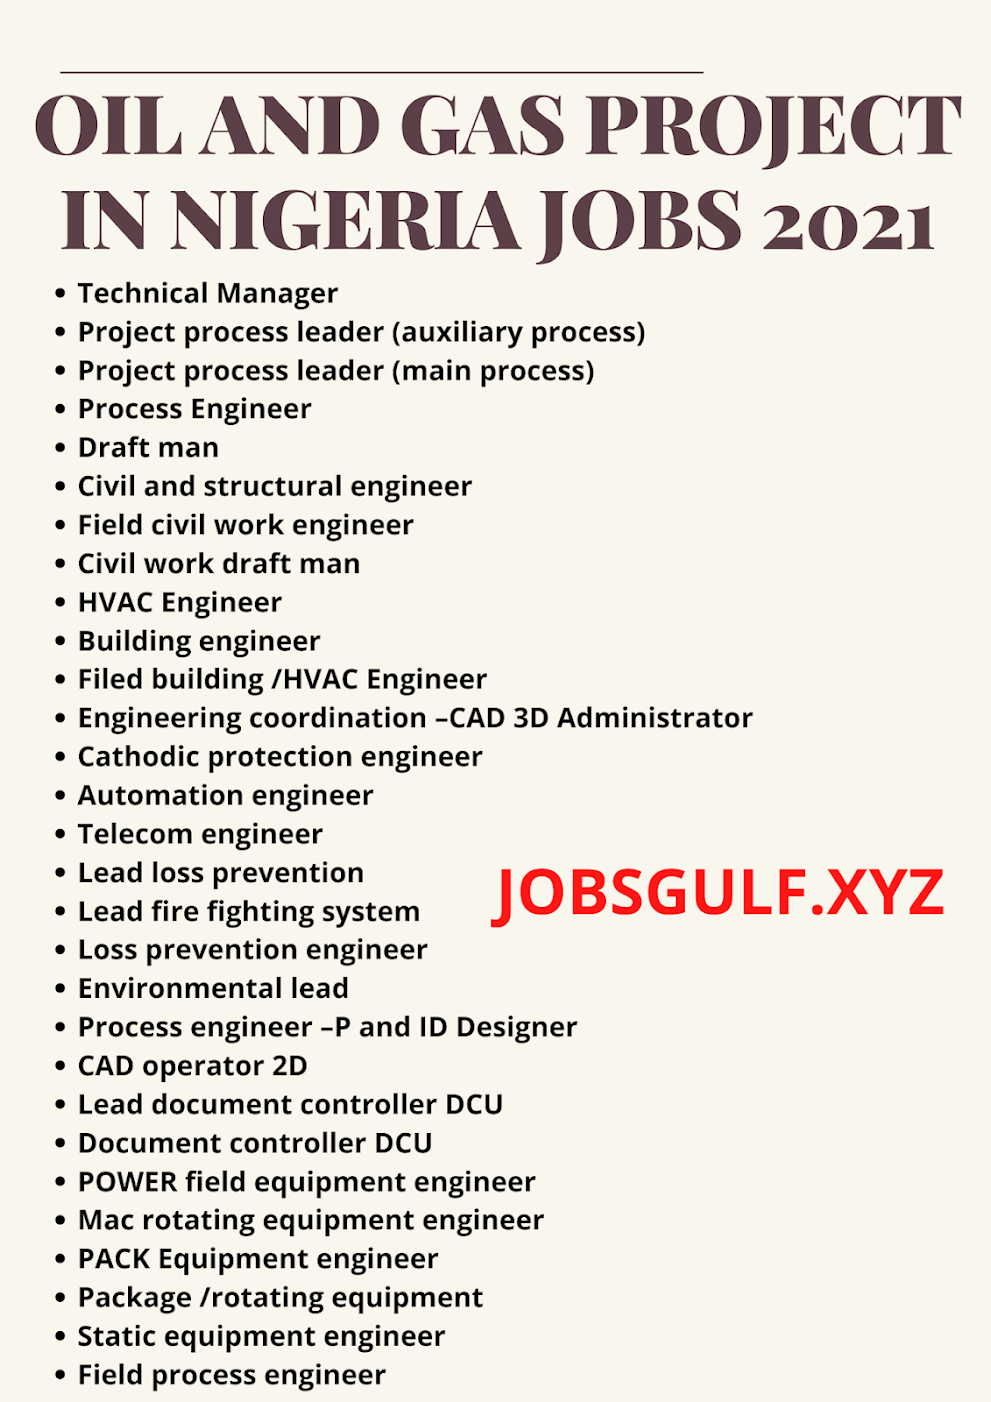 NEW OIL AND GAS PROJECT IN NIGERIA JOBS 2021